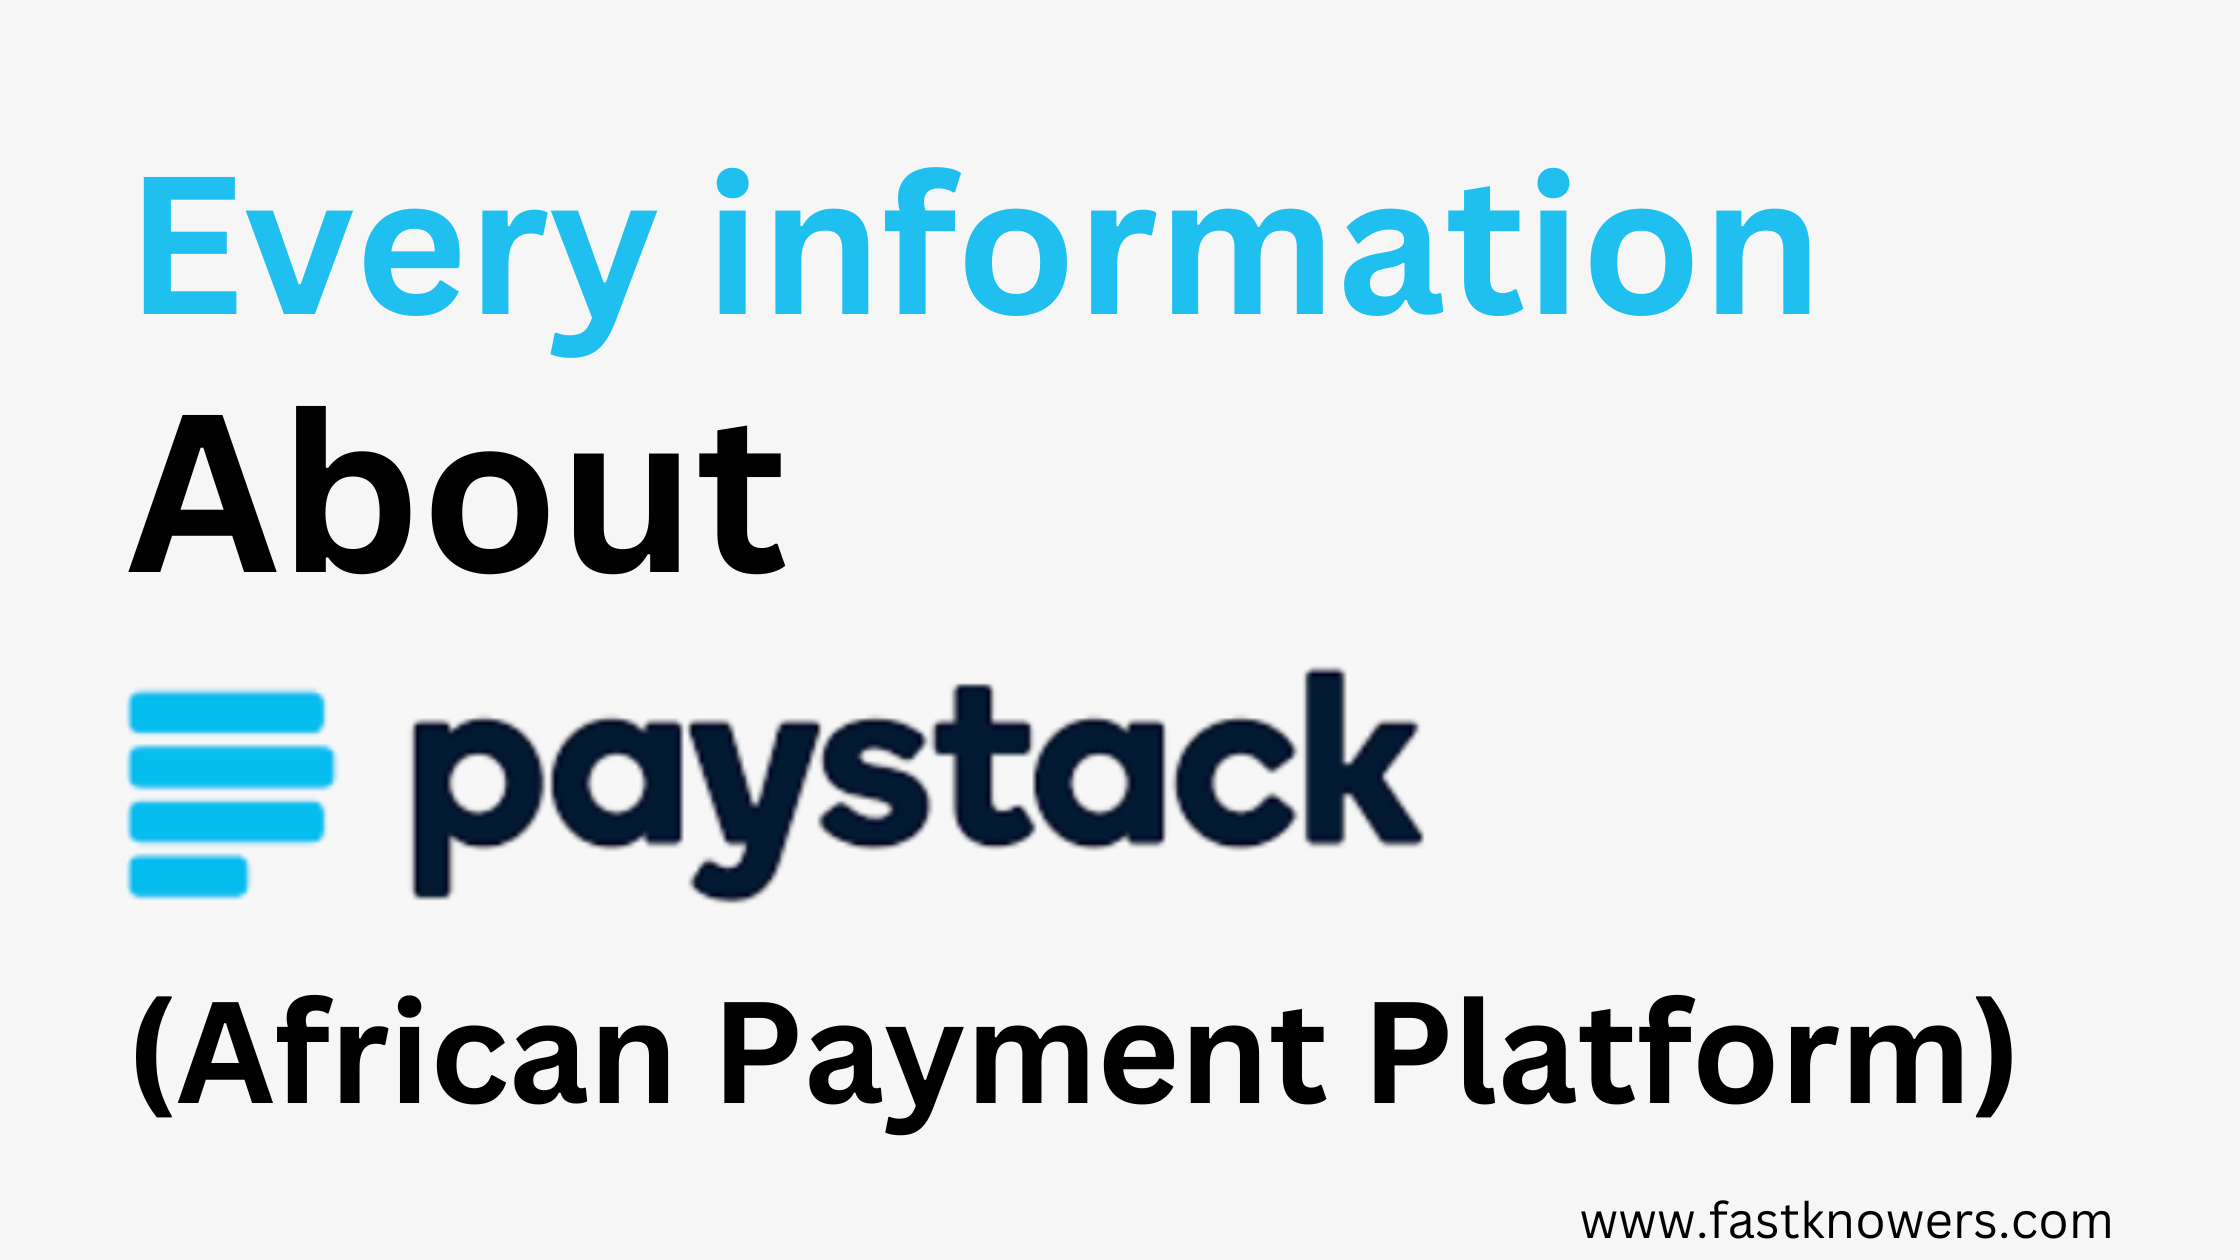 Every information about PayStack, African payment platform for digital marketers